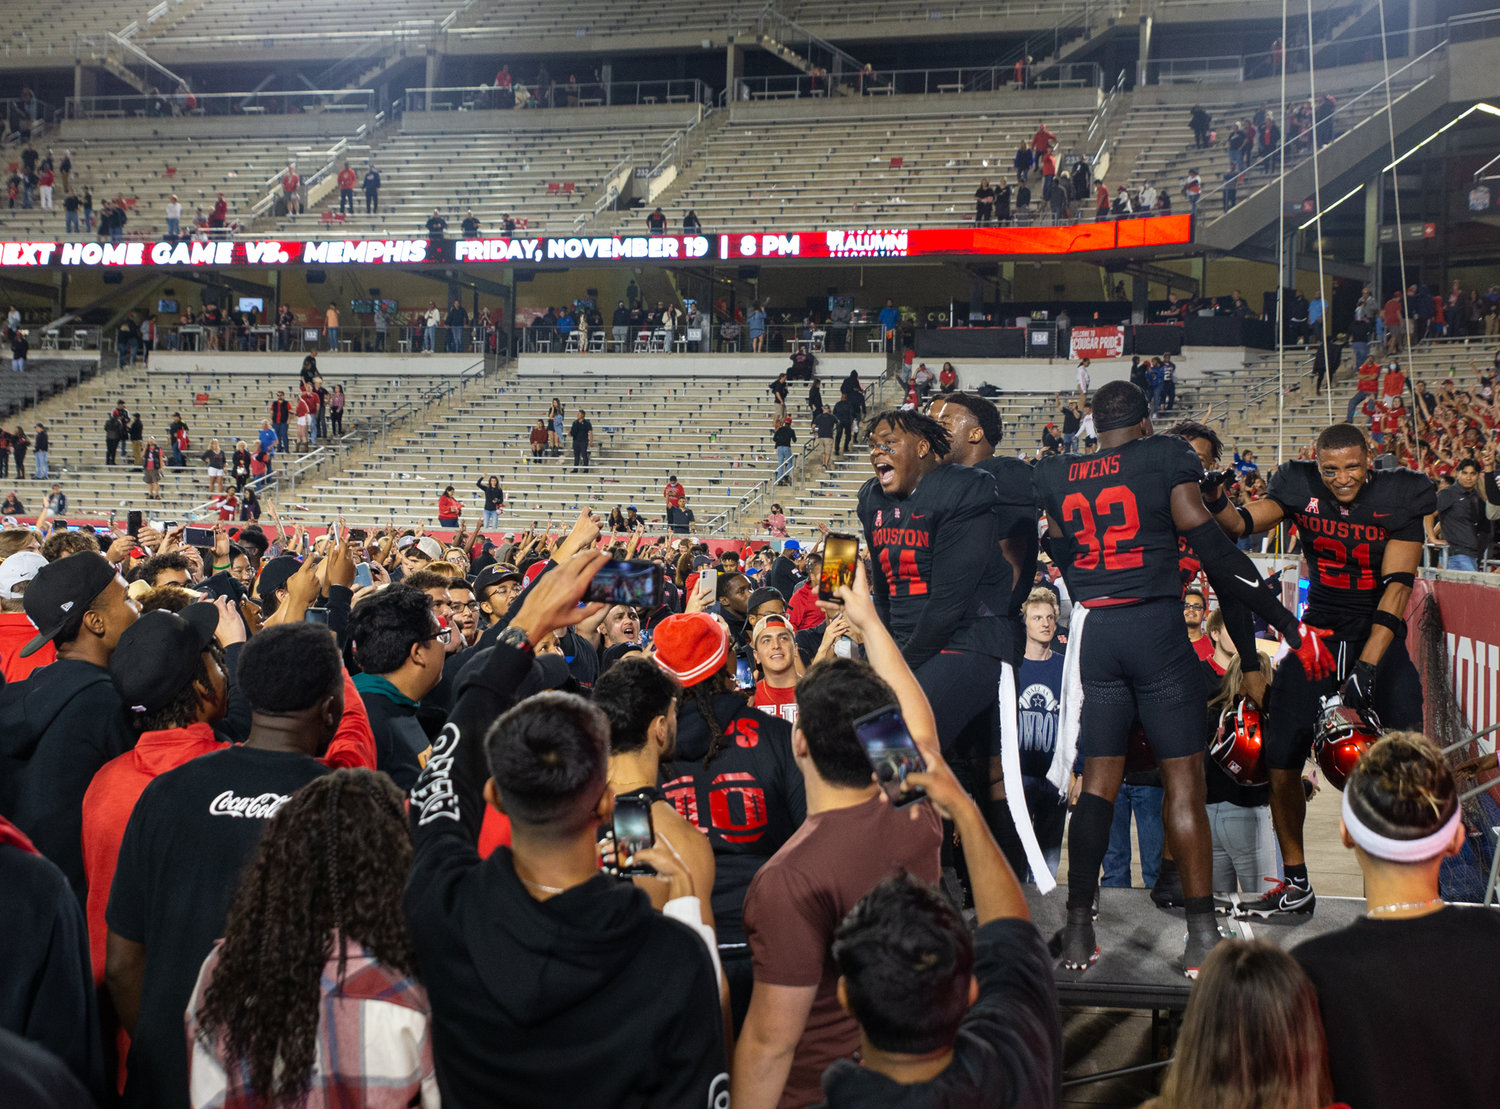 A group of Houston Cougars players celebrate on the field with fans after a 44-37 win over rival SMU in an NCAA football game on October 30, 2021 in Houston, Texas.